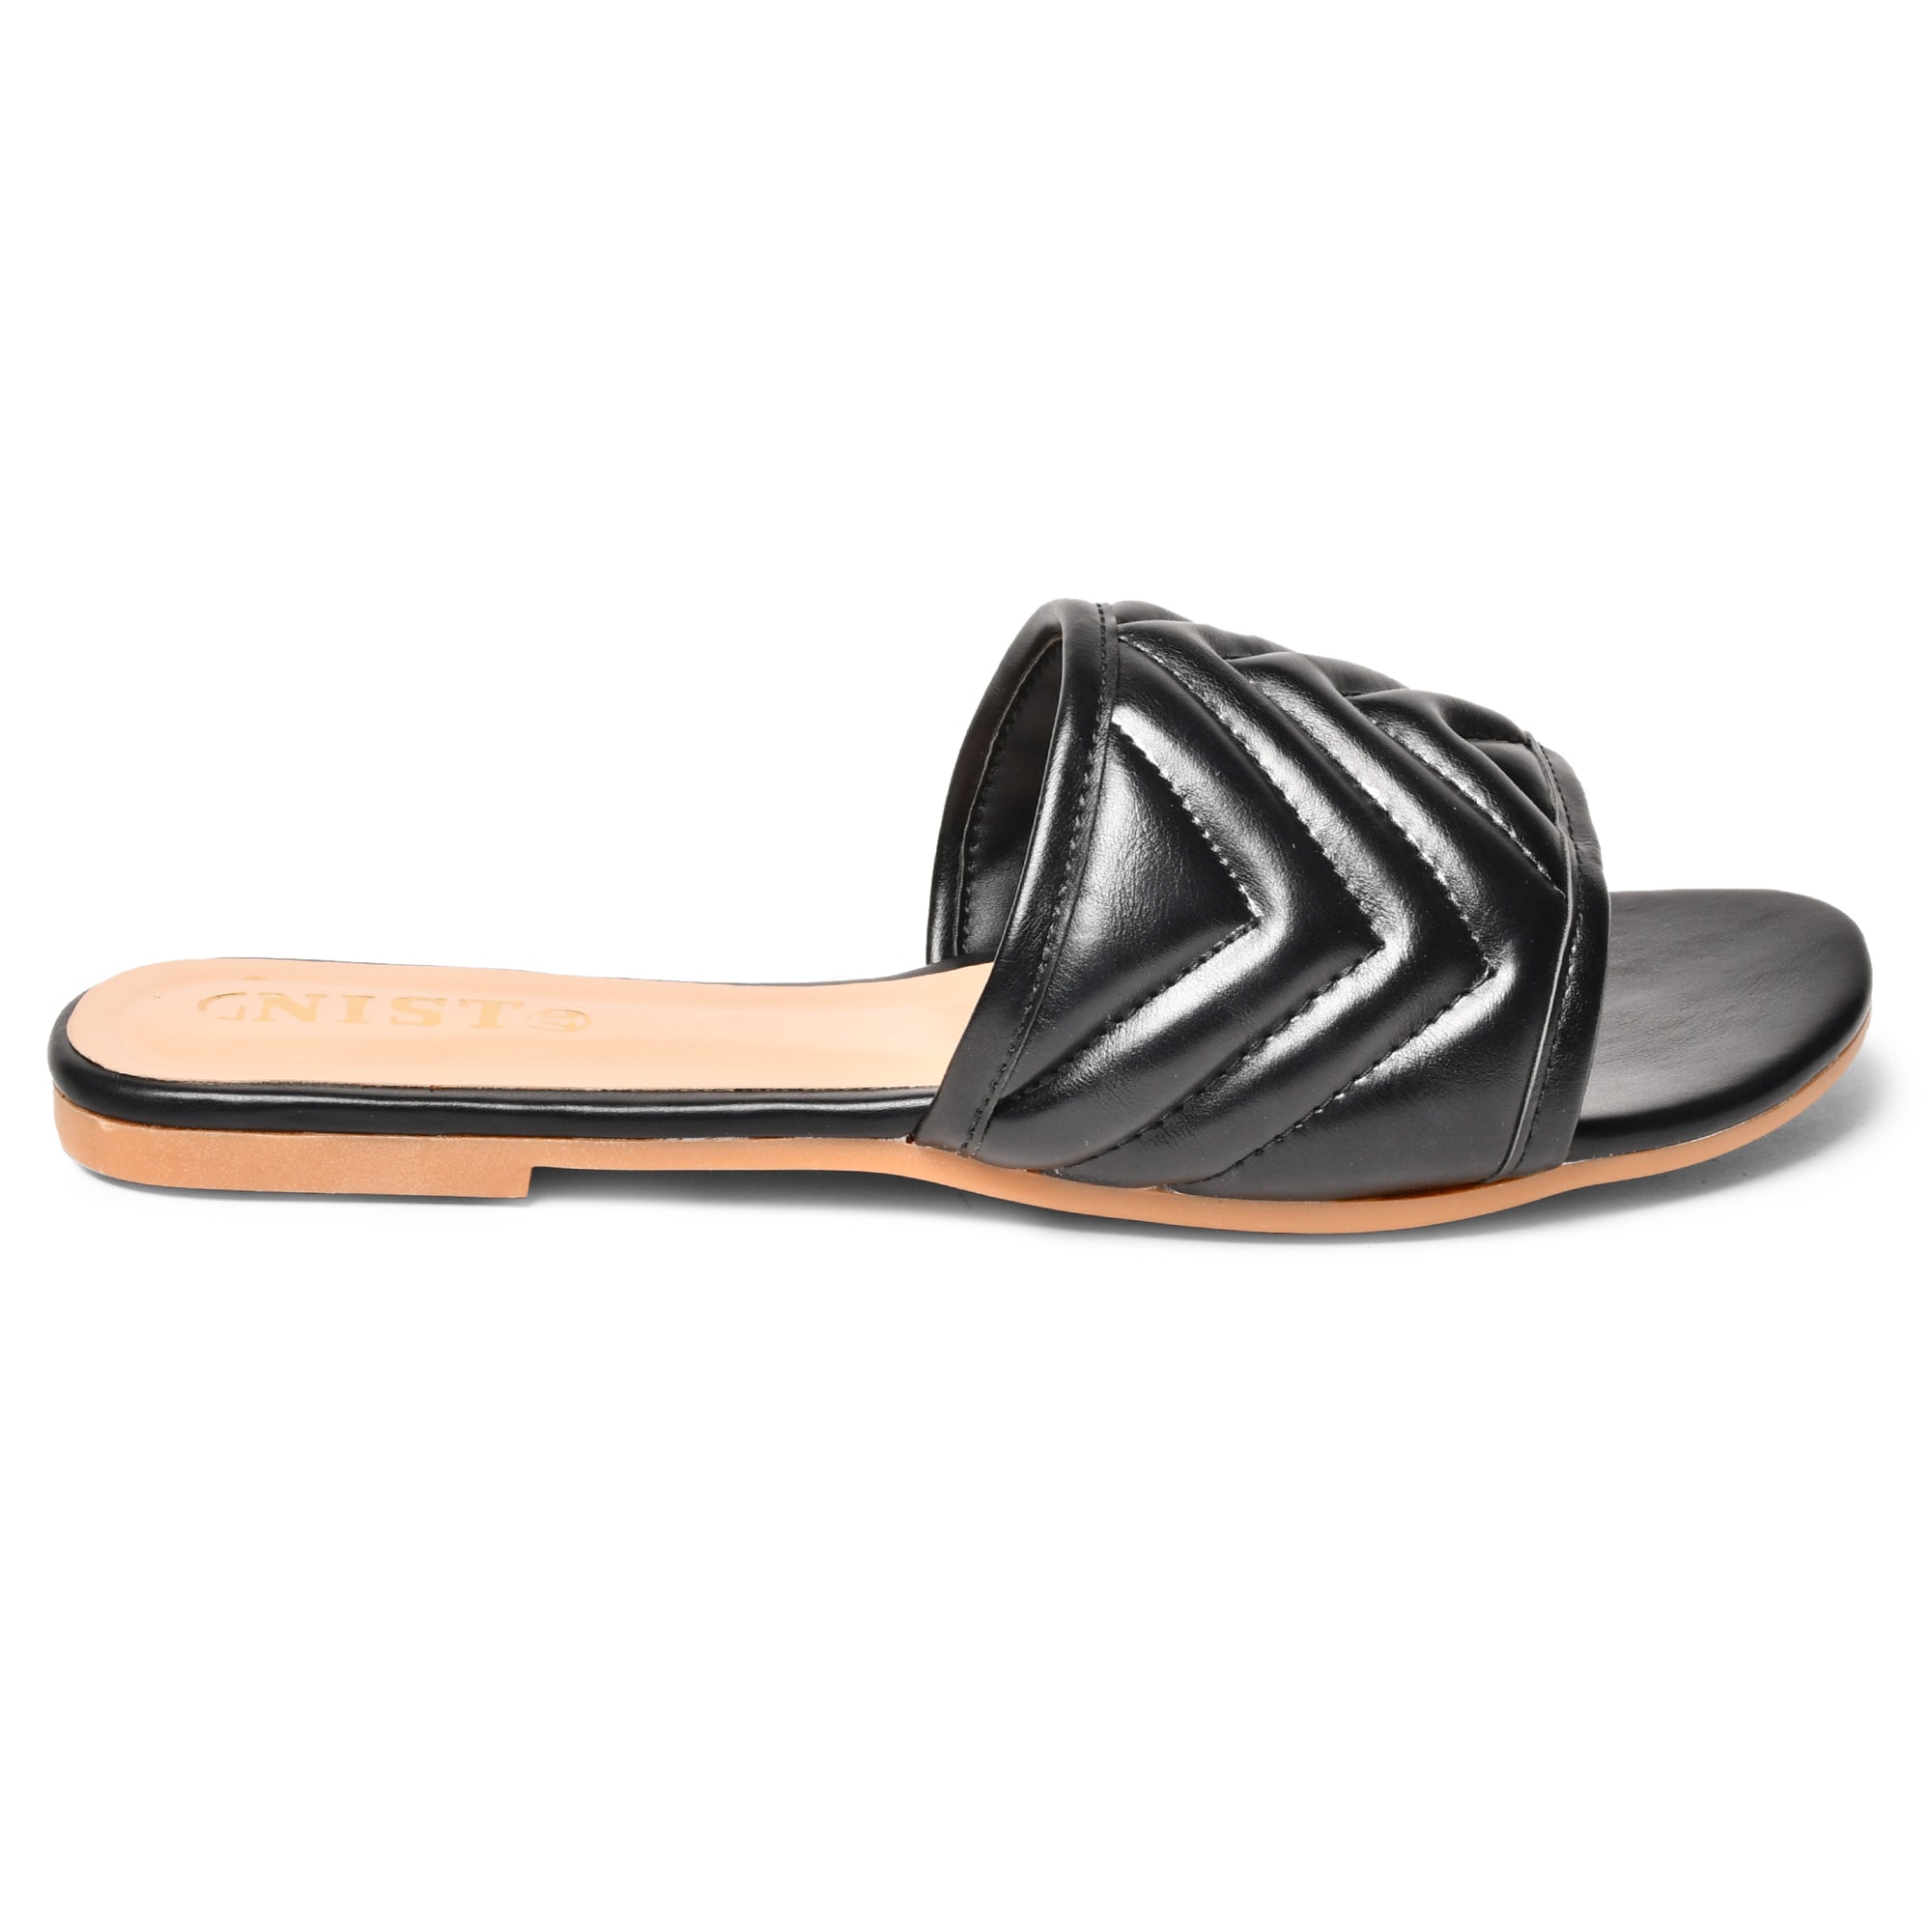 GNIST Ziczak GG Quilted Faux Leather Black Flats